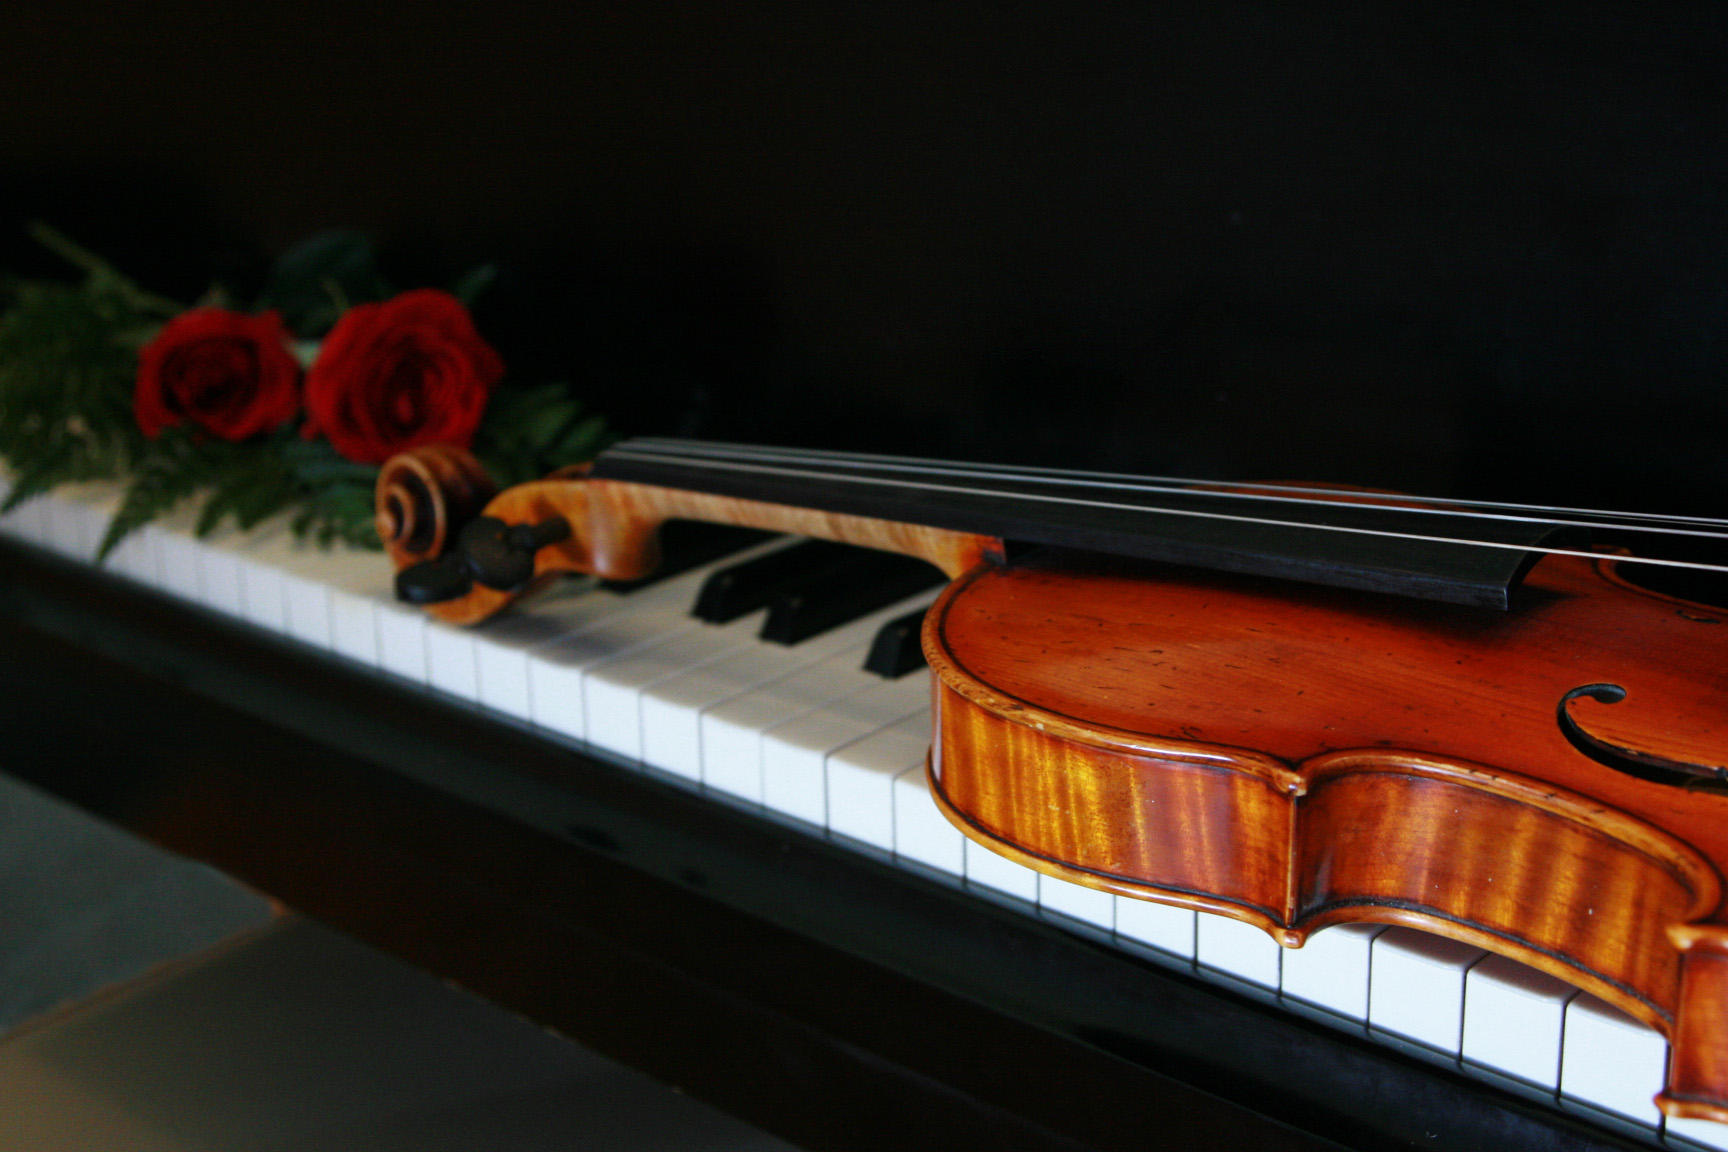 Violin and Roses by nateeboy68 on DeviantArt